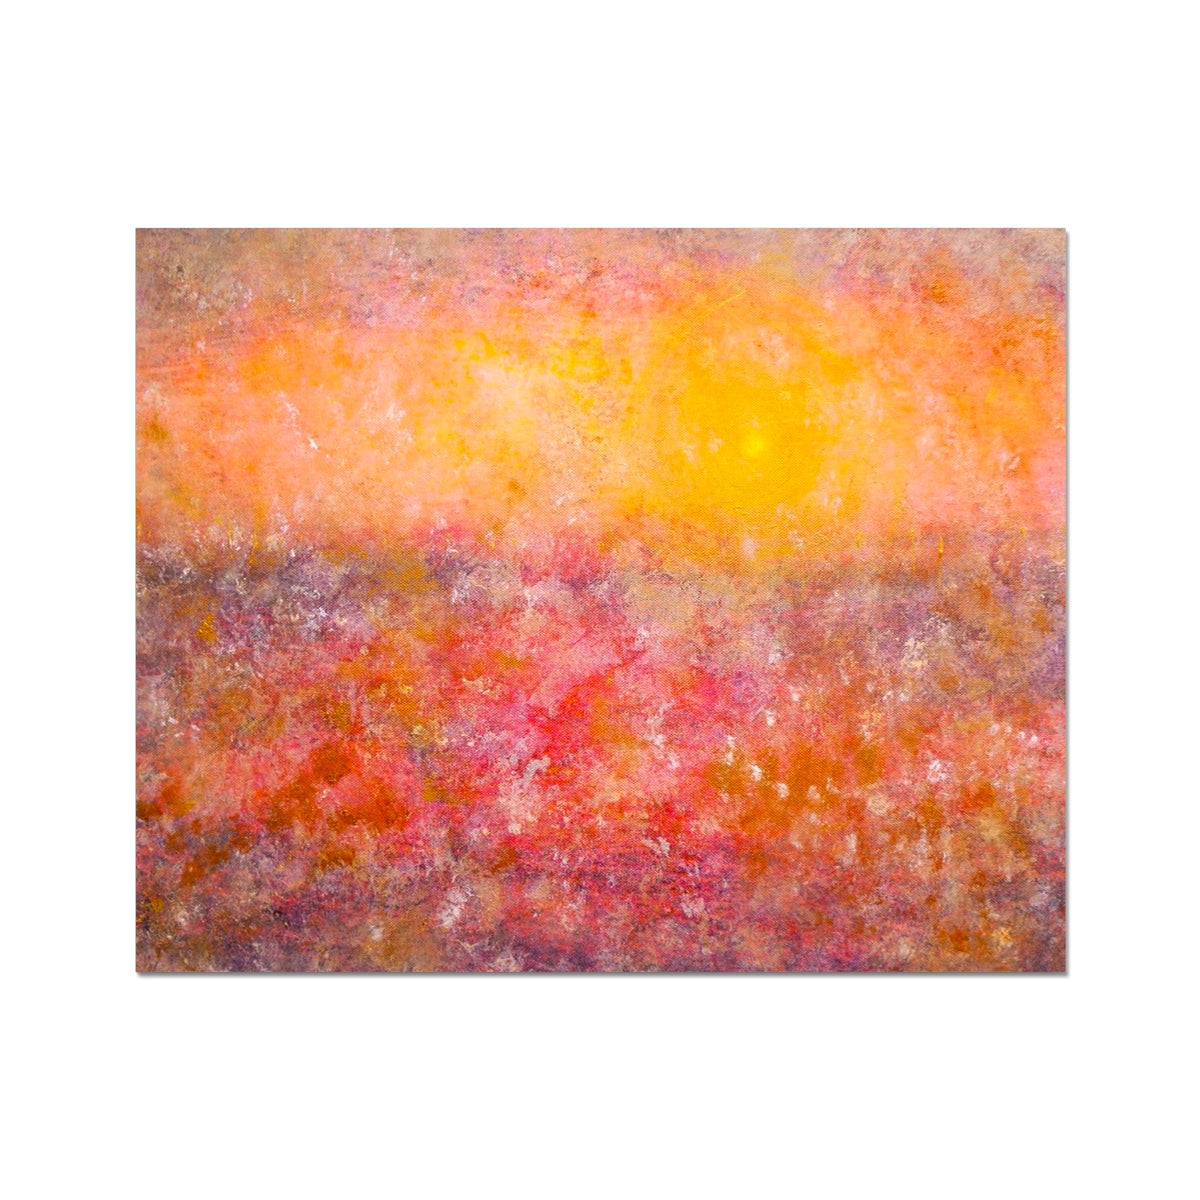 Sunrise Mist Horizon Abstract Painting | Artist Proof Collector Prints From Scotland-Artist Proof Collector Prints-Abstract & Impressionistic Art Gallery-20"x16"-Paintings, Prints, Homeware, Art Gifts From Scotland By Scottish Artist Kevin Hunter